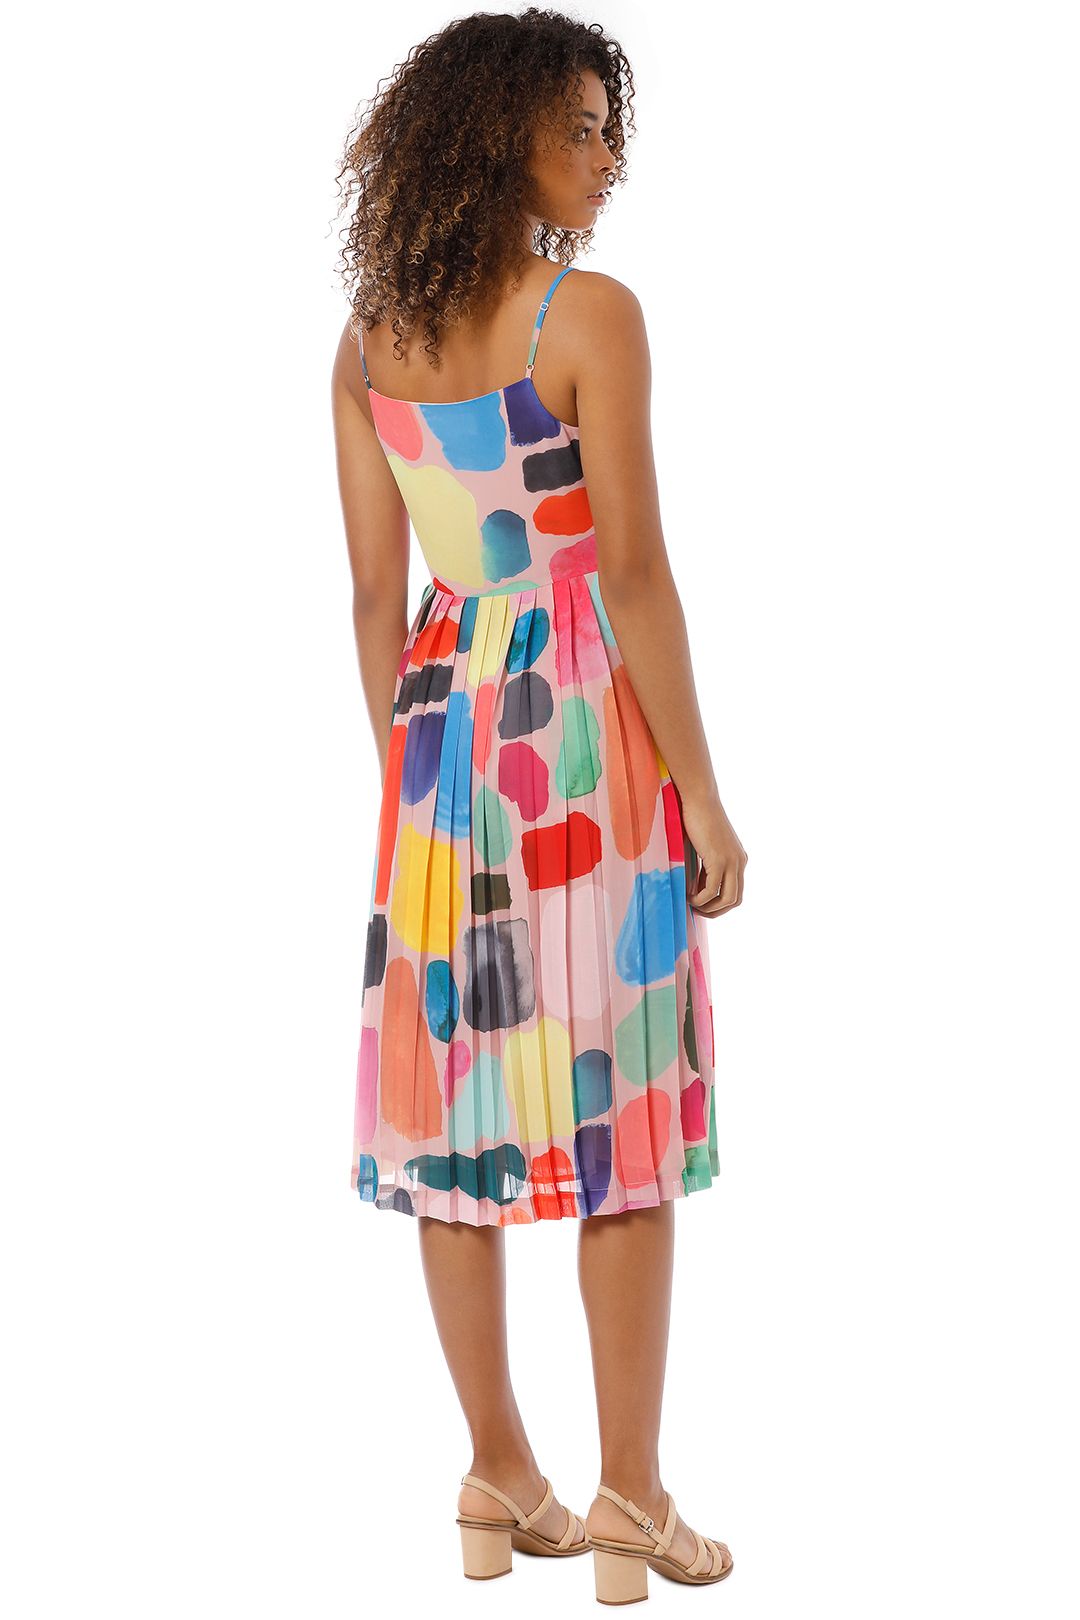 Shapes Dress by Gorman for Rent